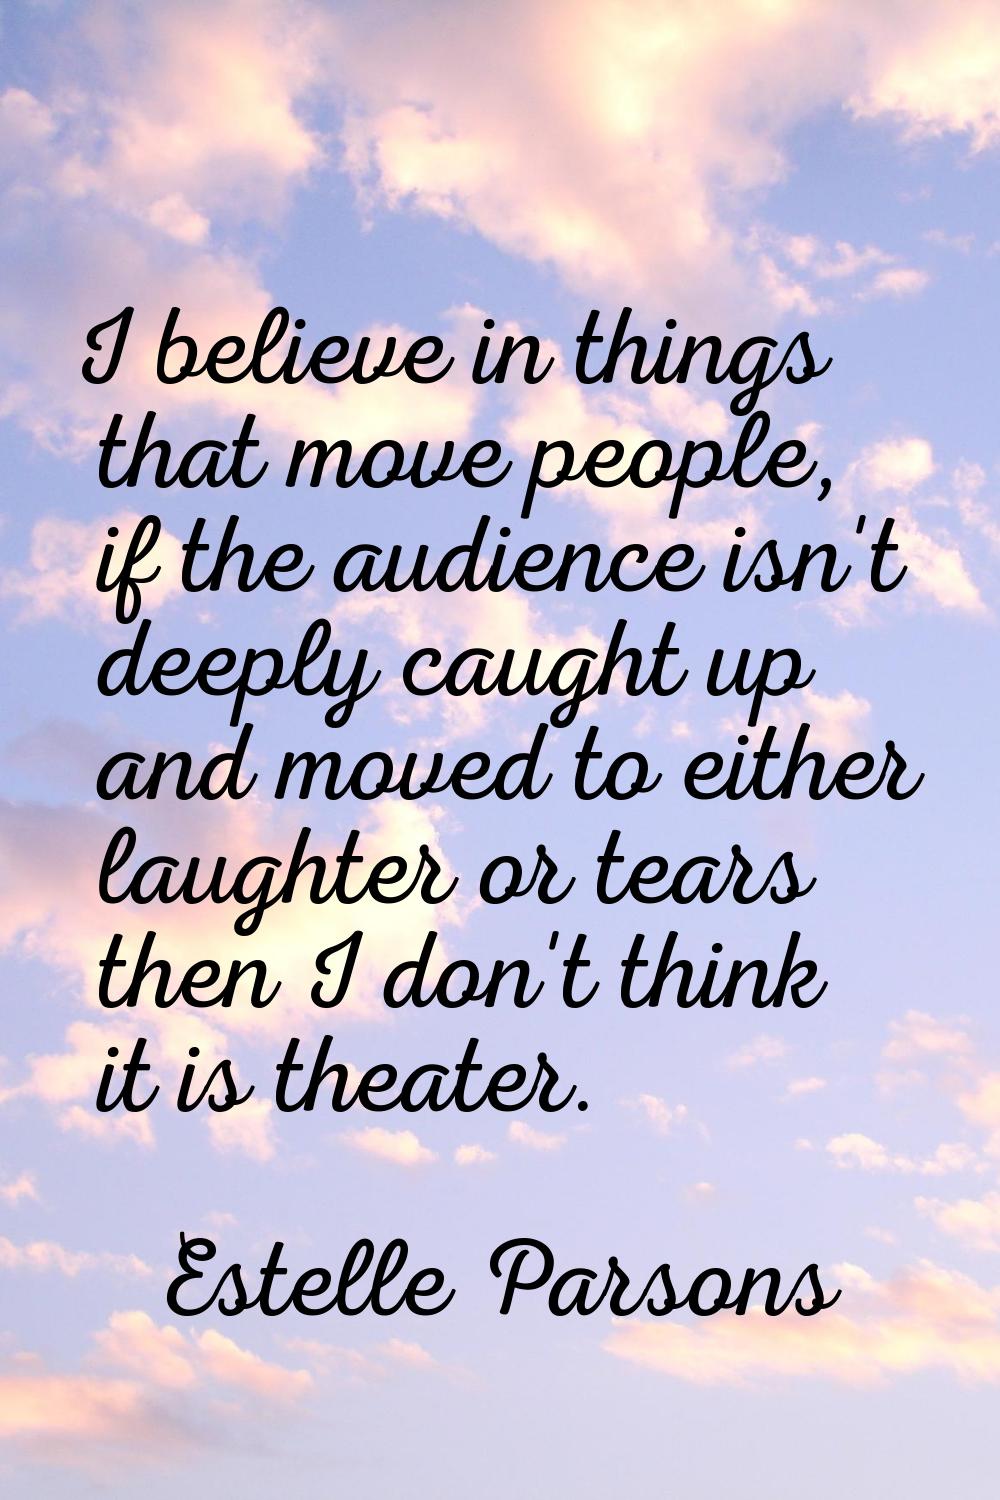 I believe in things that move people, if the audience isn't deeply caught up and moved to either la